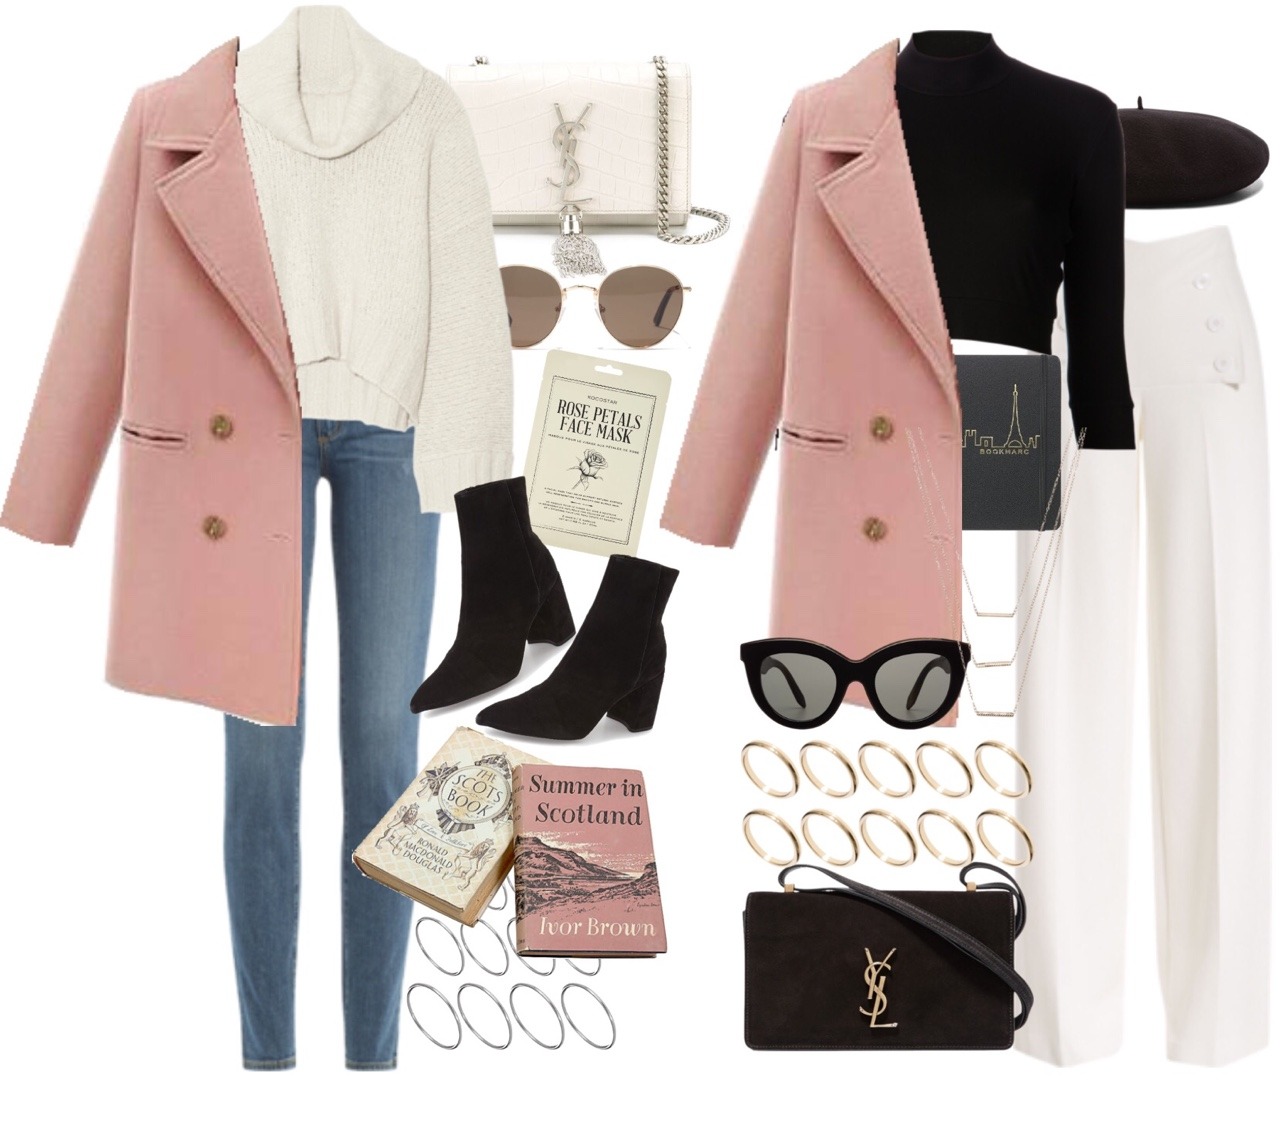 Harry's Clothes, How to style a pink pea coat for France and London...